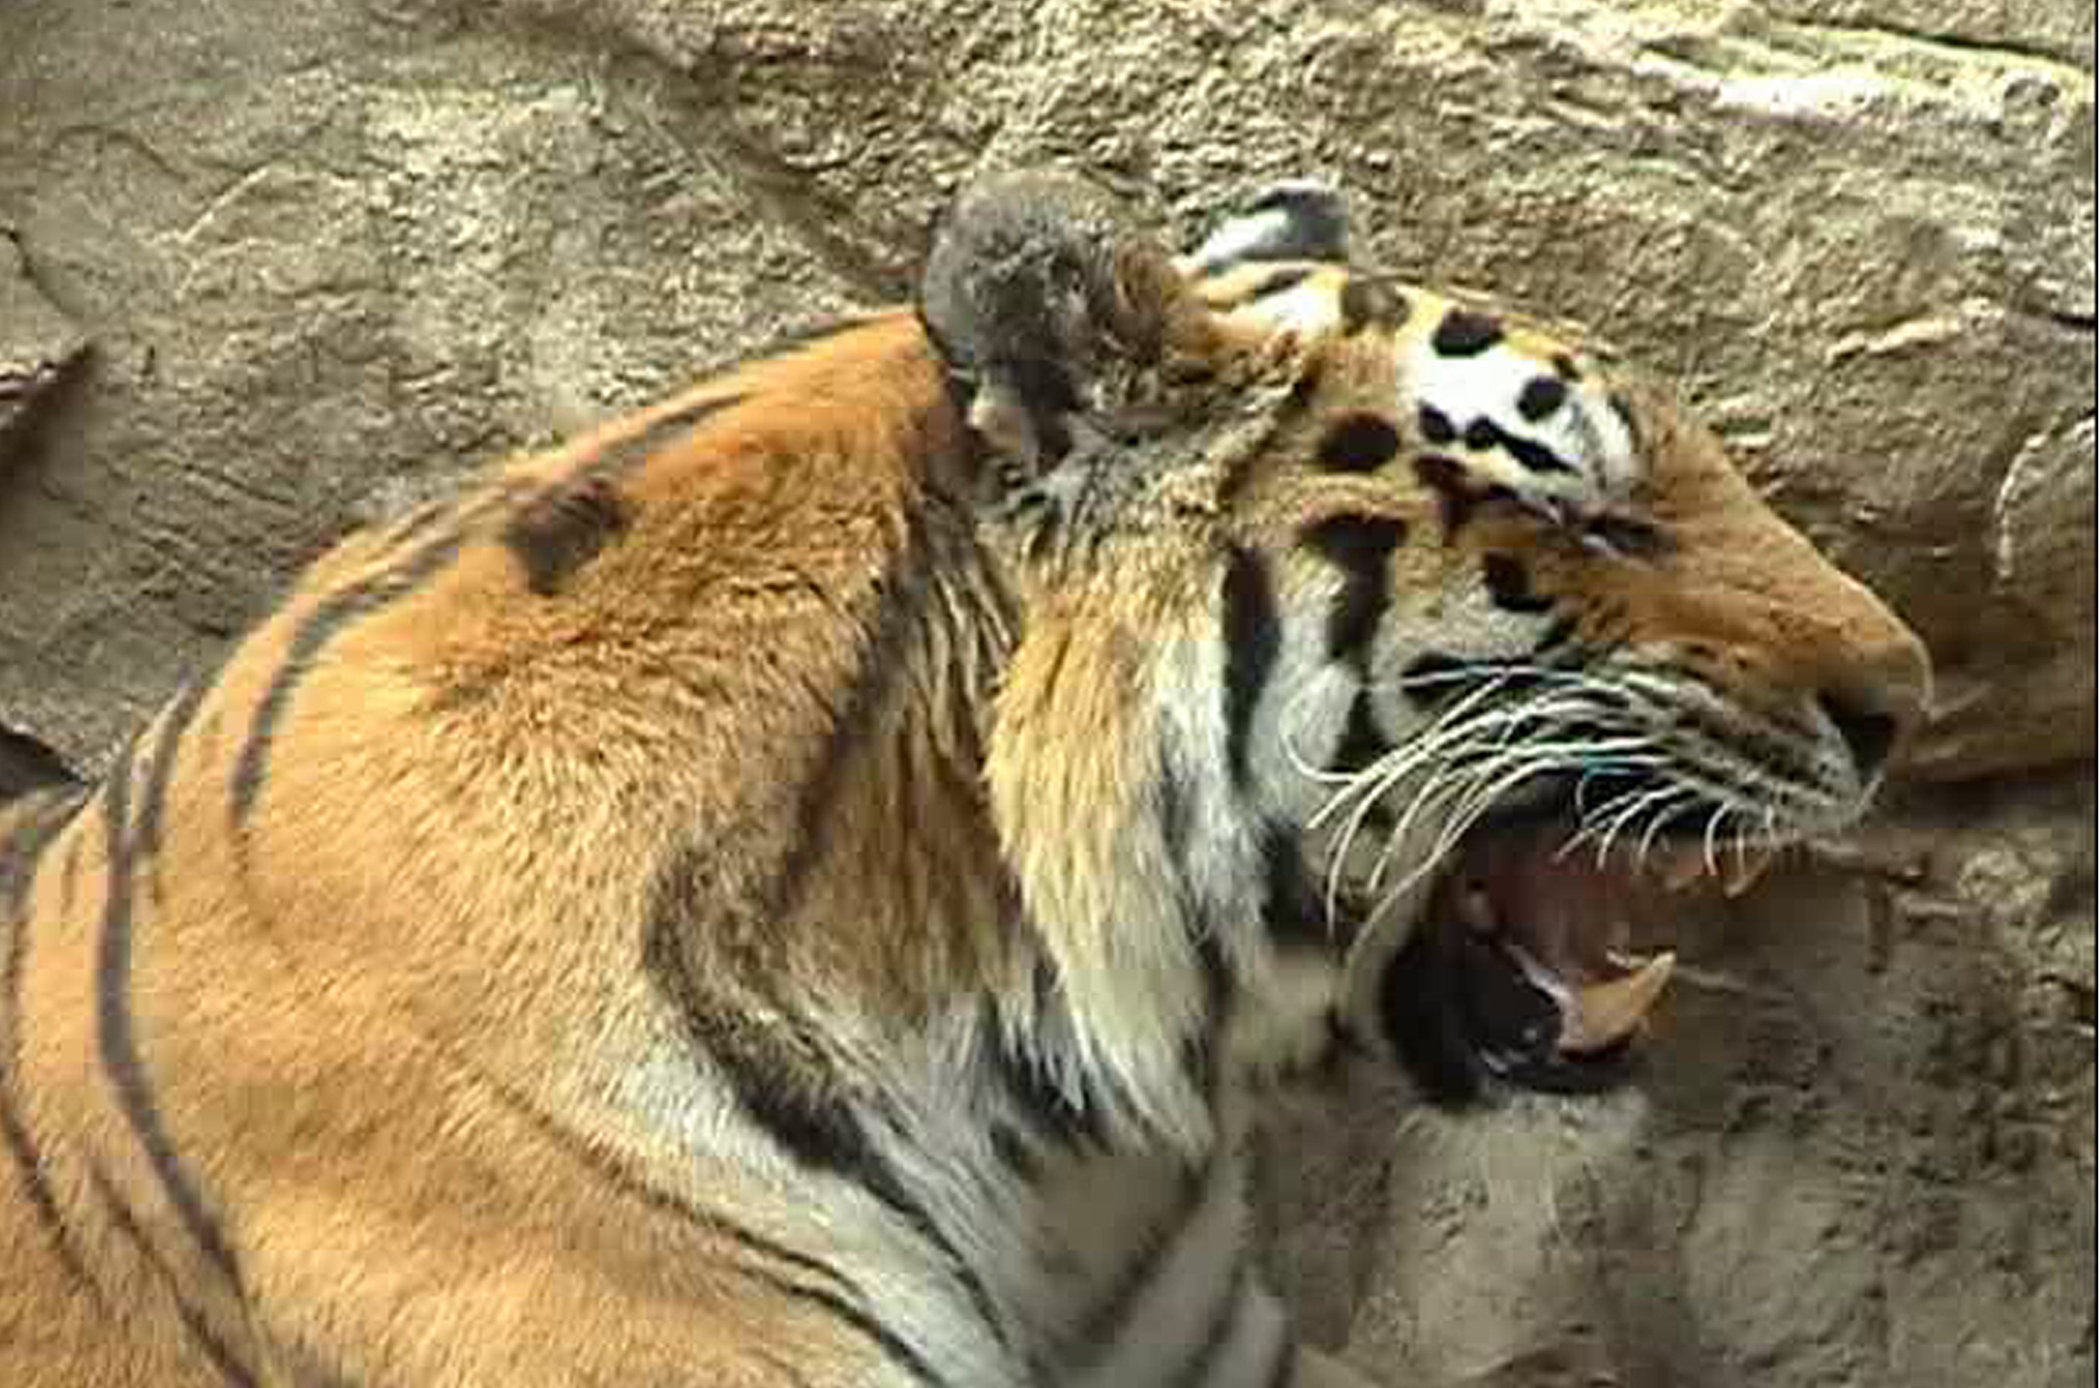 An Amur or Siberian tiger roars, producing what is known as a long-distance advertisement call. A new study of vocal folds from six tigers and lions shows that the frequency of their roars is determined by the shape of their vocal folds and by the ability of their vocal folds to stretch and shear, not by nerve impulses from the brain. The study was performed by scientists from the National Center for Voice and Speech at the University of Utah and University of Iowa, and the Boys Town National Research Hospital in Omaha.